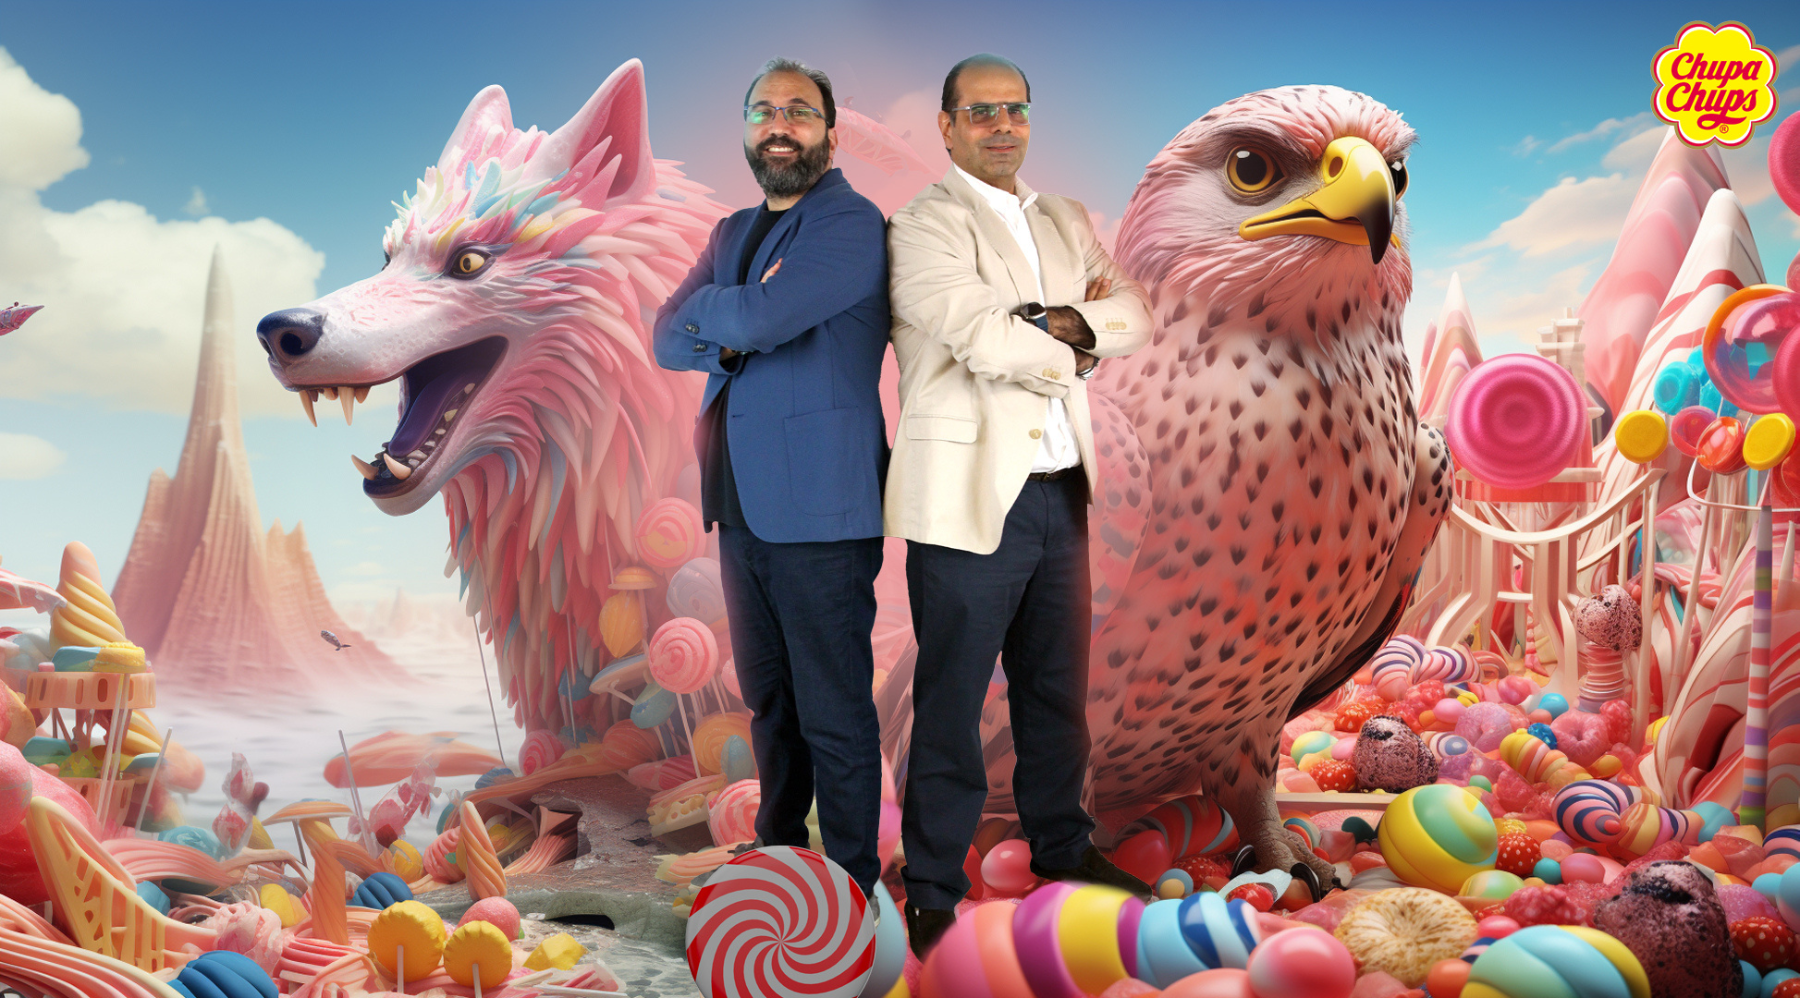 Candy Land With a Twist: Wavemaker MENA and Perfetti Van Melle MEAP's Latest AI Campaign for Chupa Chups